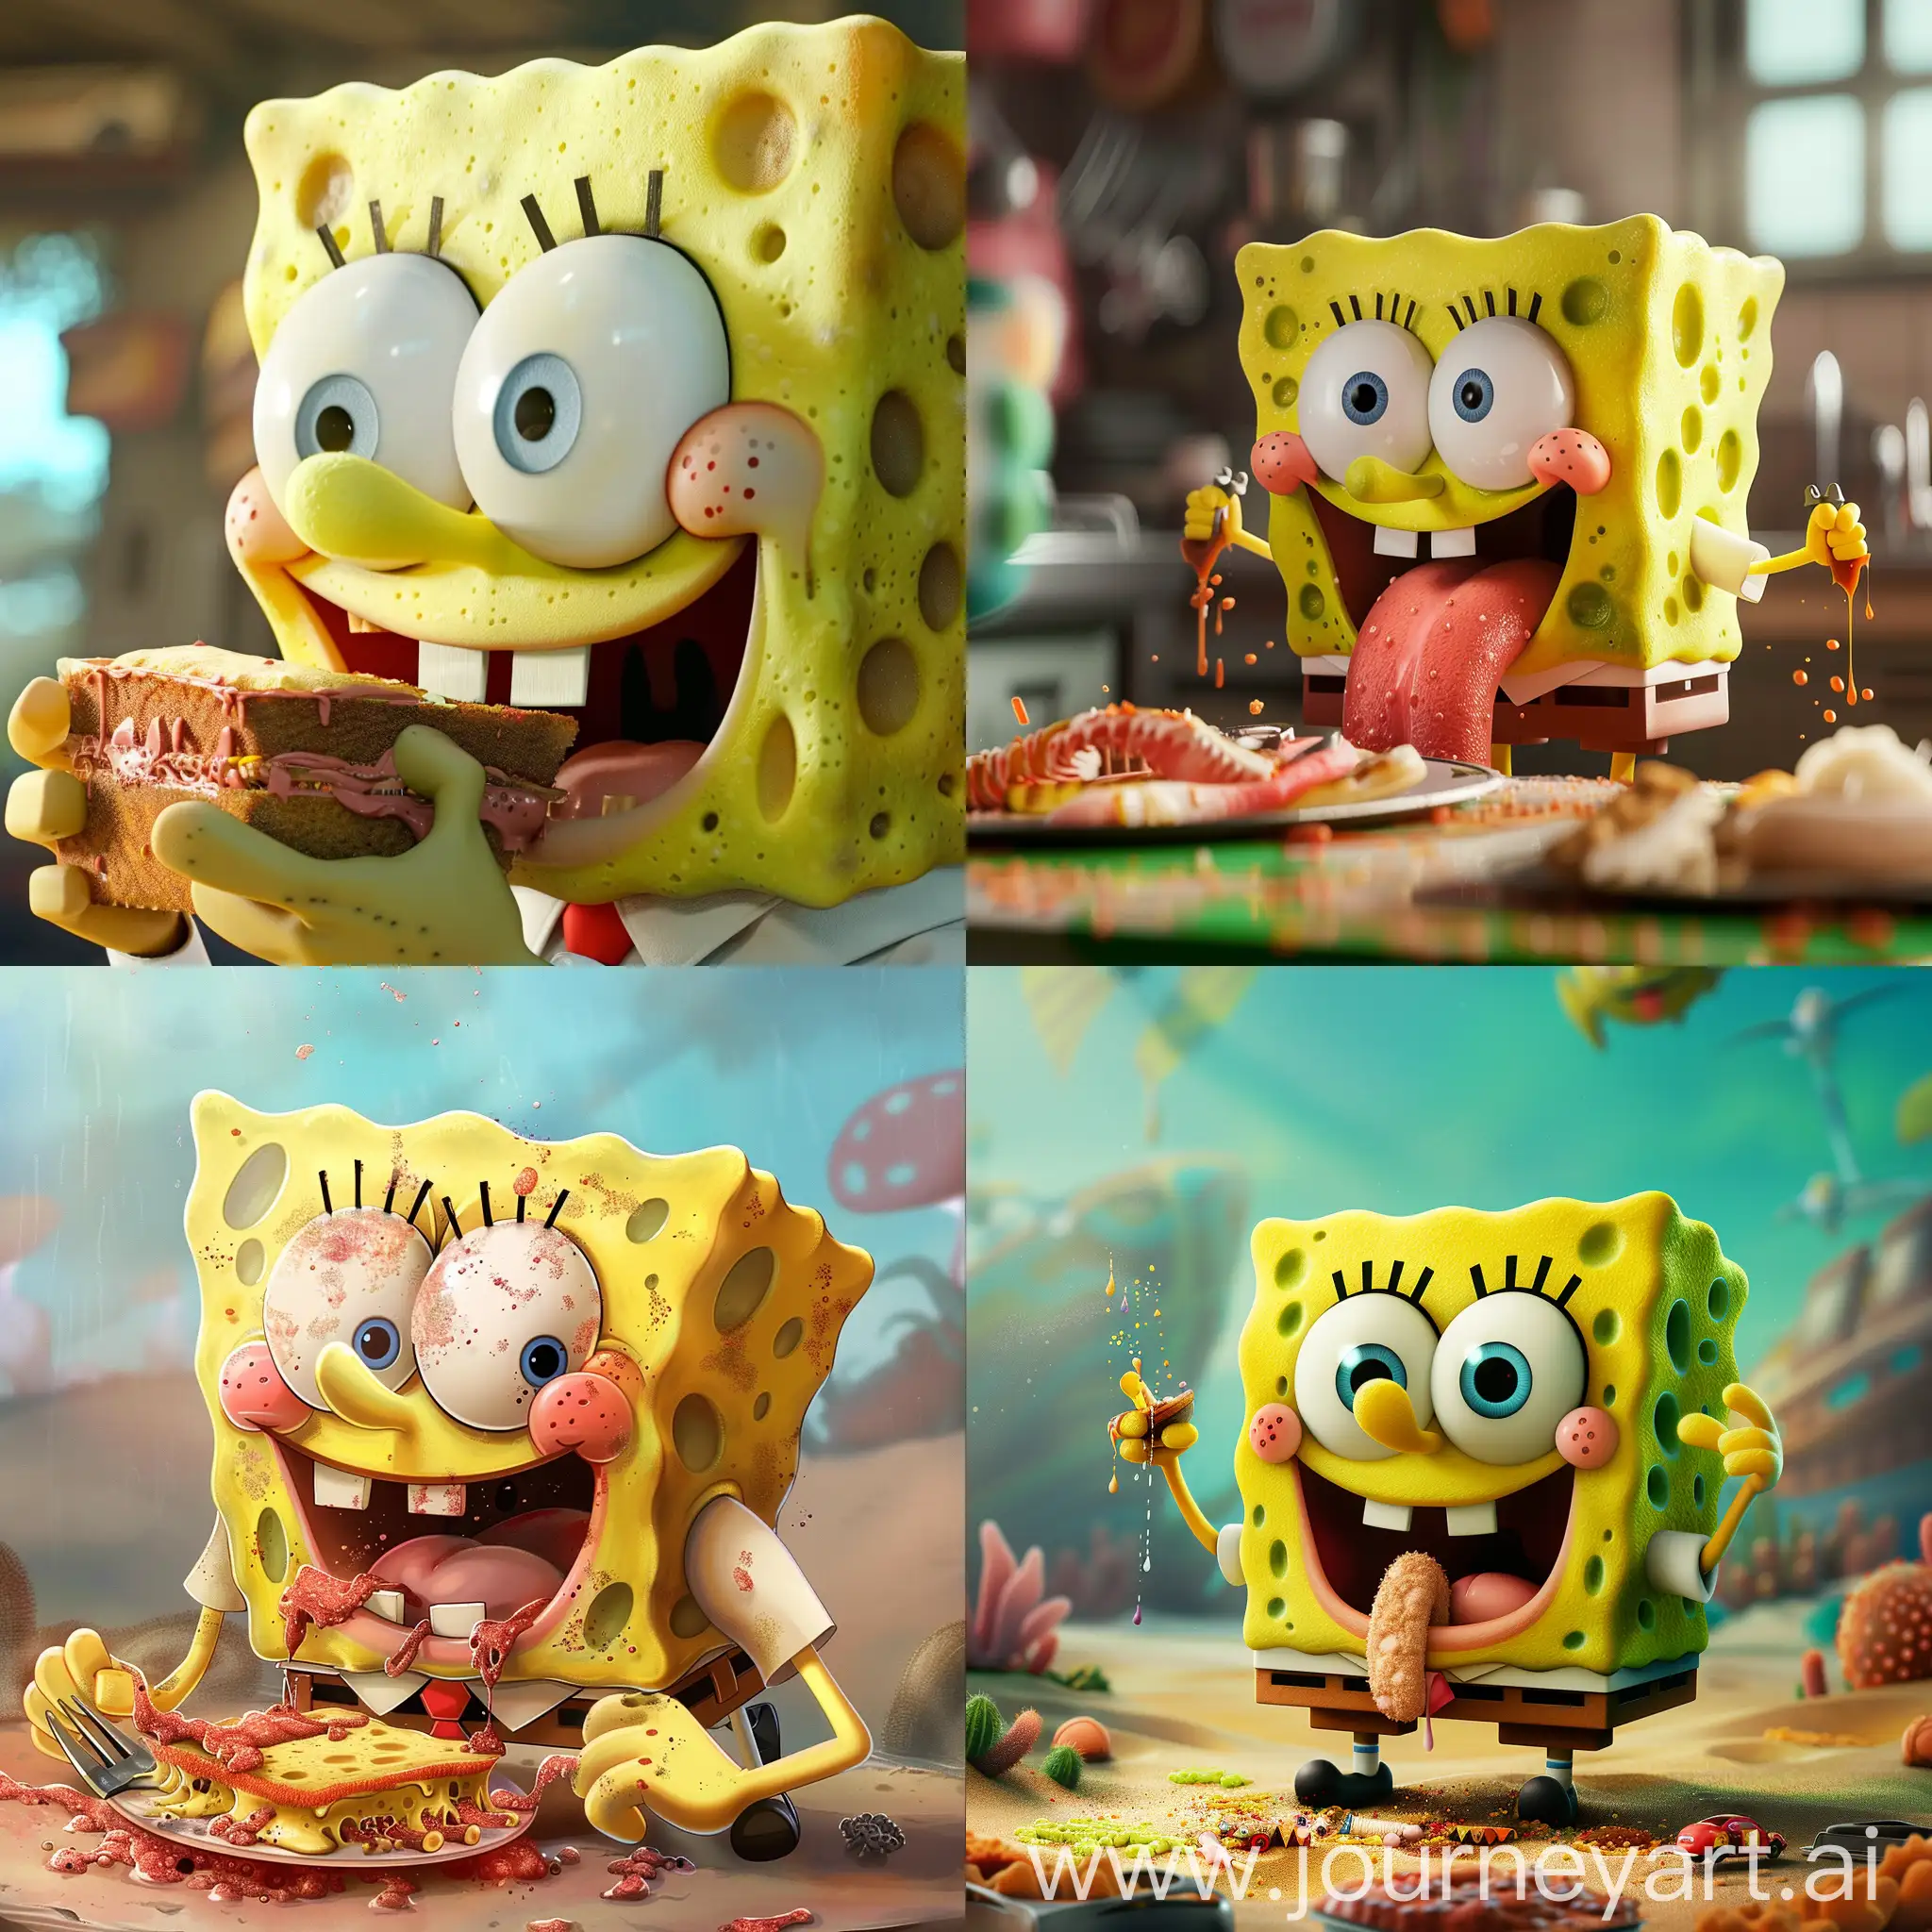 SpongeBob-and-Patrick-Eating-with-Playful-Sounds